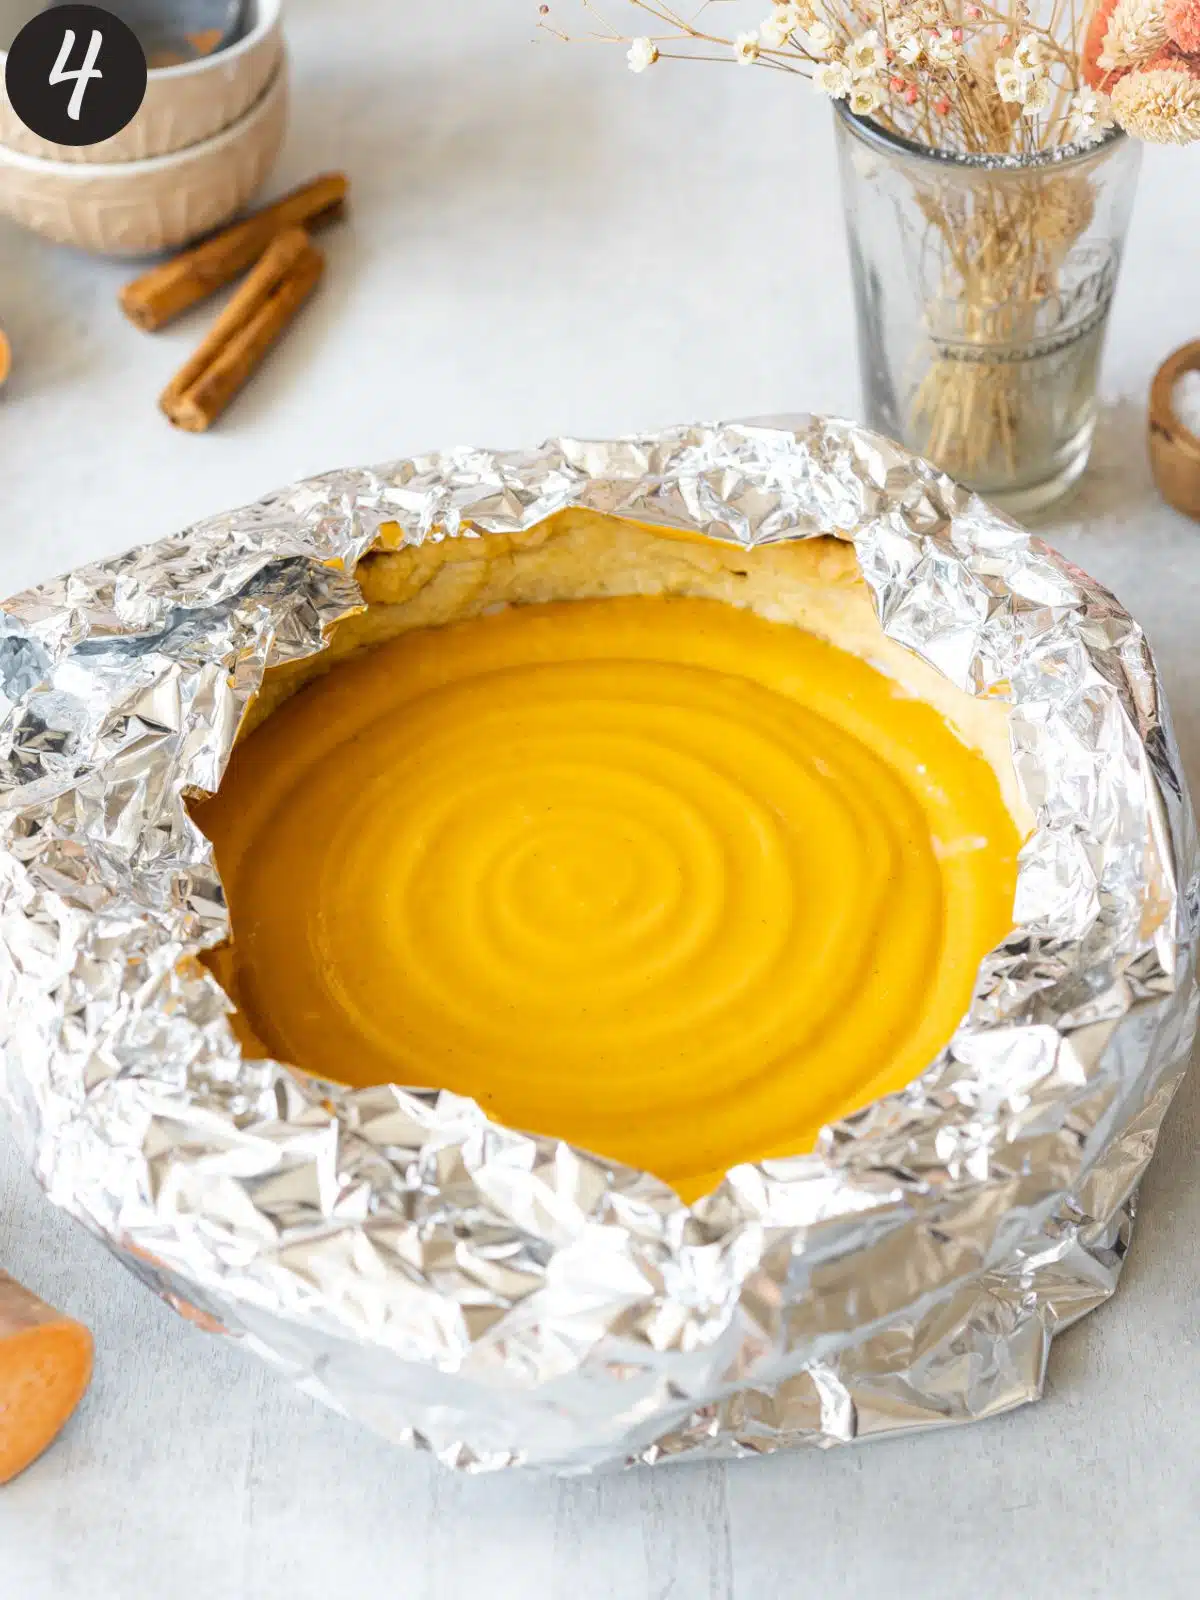 sweet potato pie with foil tent around the crust.